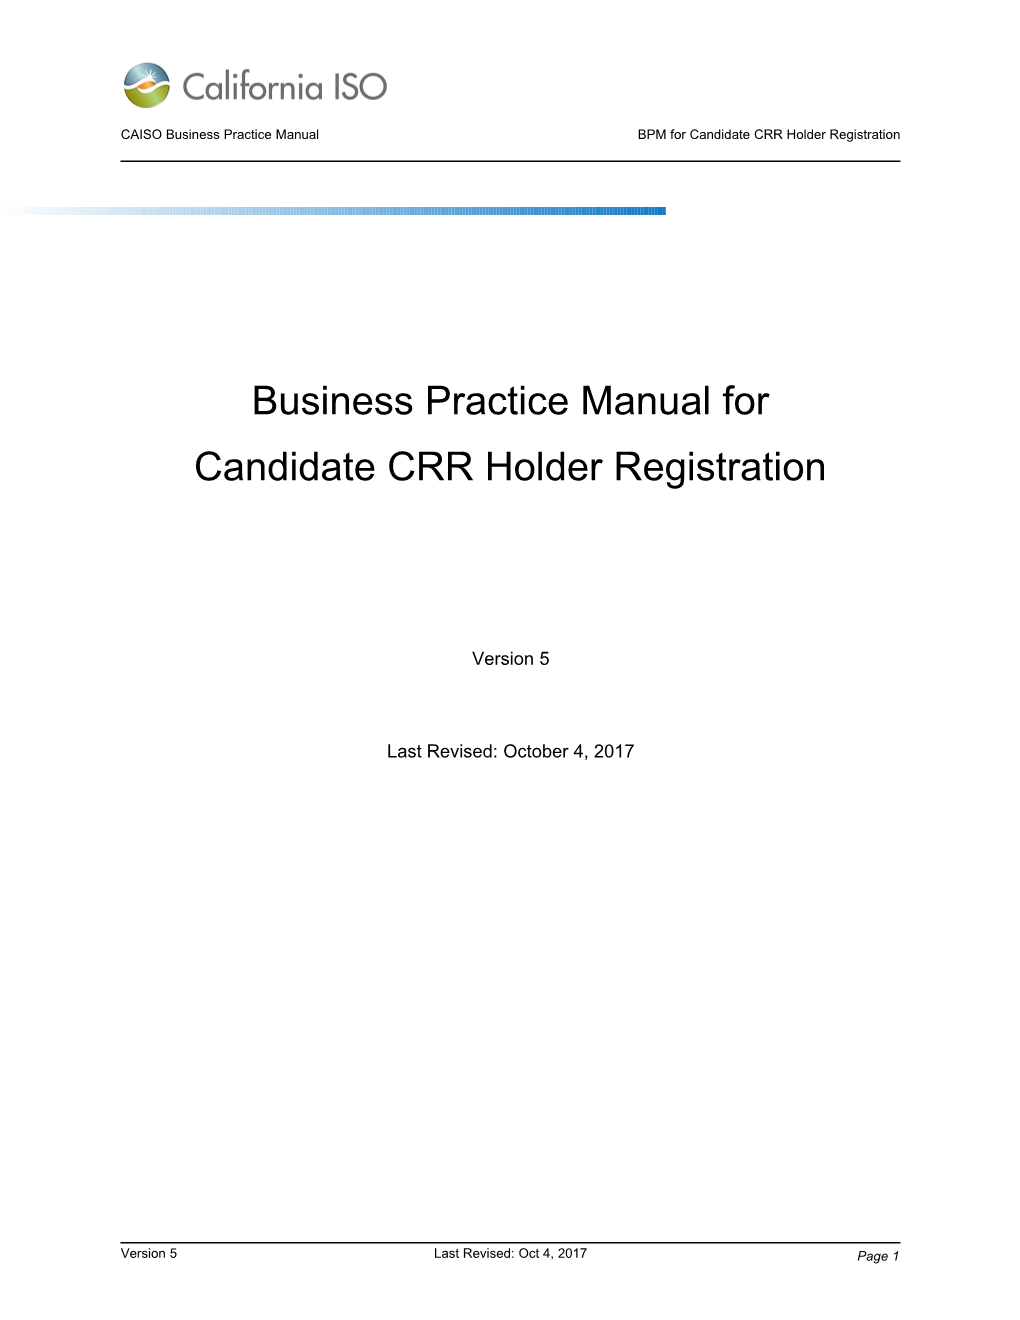 CAISO Business Practice Manualbpm for Candidate CRR Holder Registration